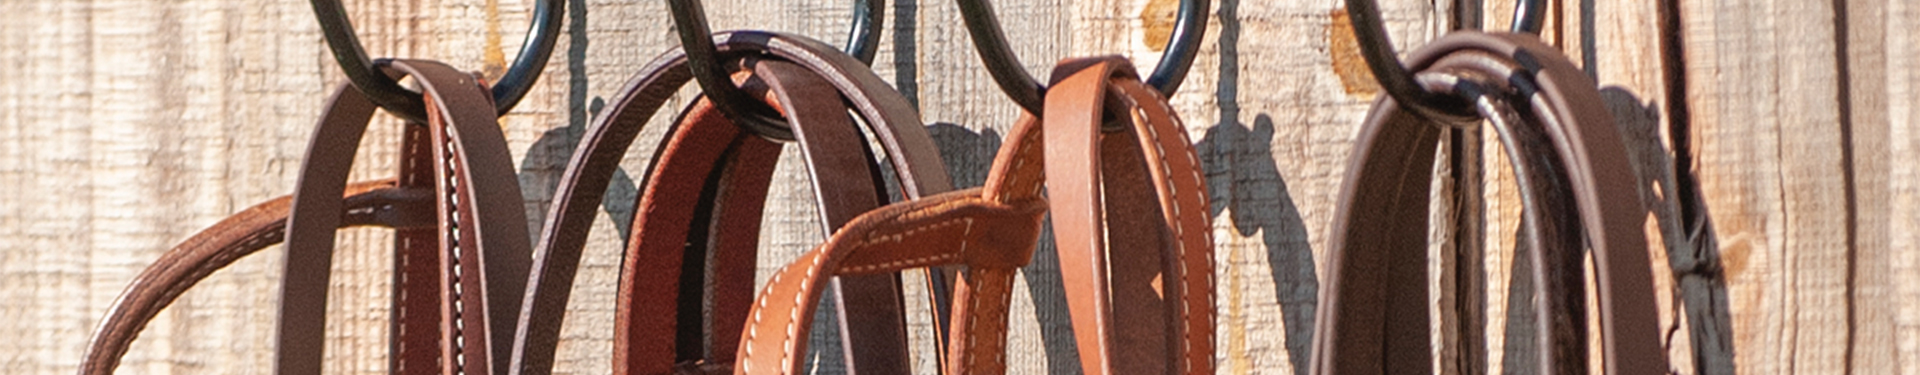 stable-accessories-banner